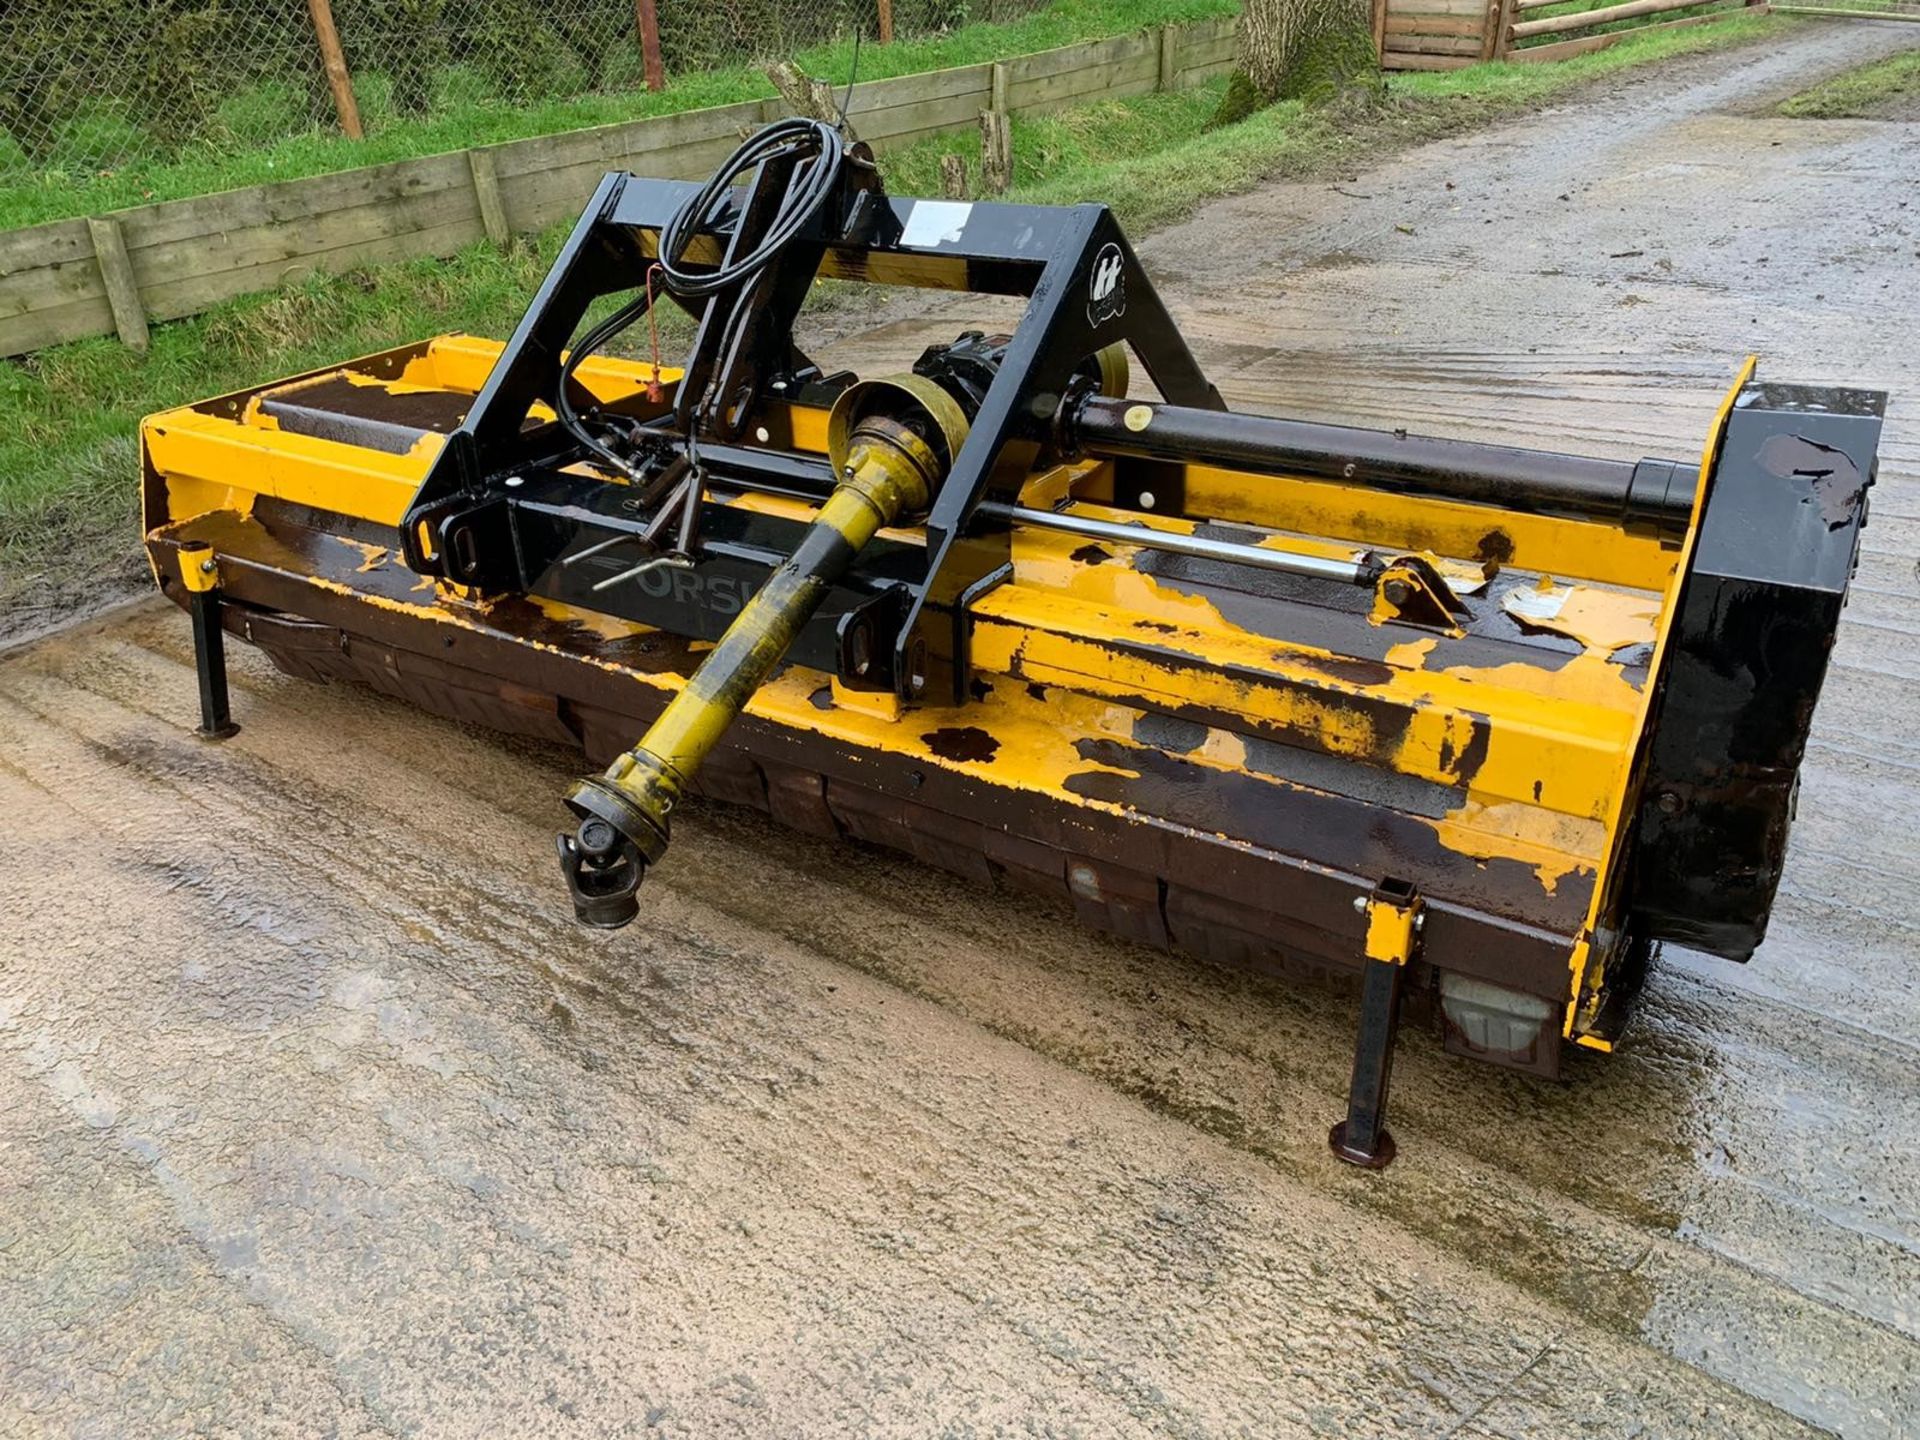 ORSI 2.8MTR FLAIL MOWER 2007, HYDRAULIC SIDE SHIFT FRONT/REAR